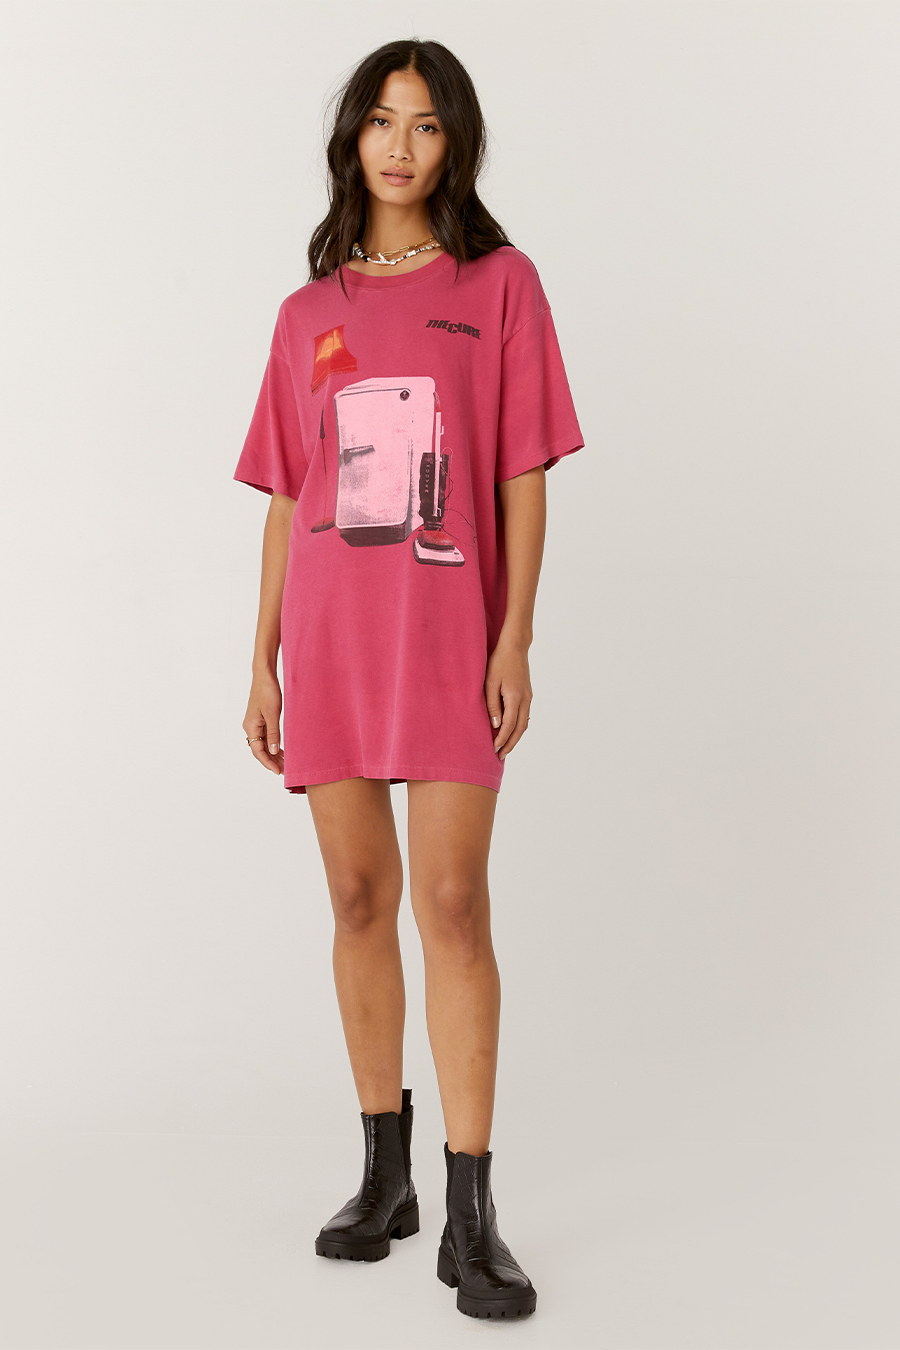 The Cure Imaginary Boys T-Shirt Dress | Passionfruit - Main Image Number 1 of 2